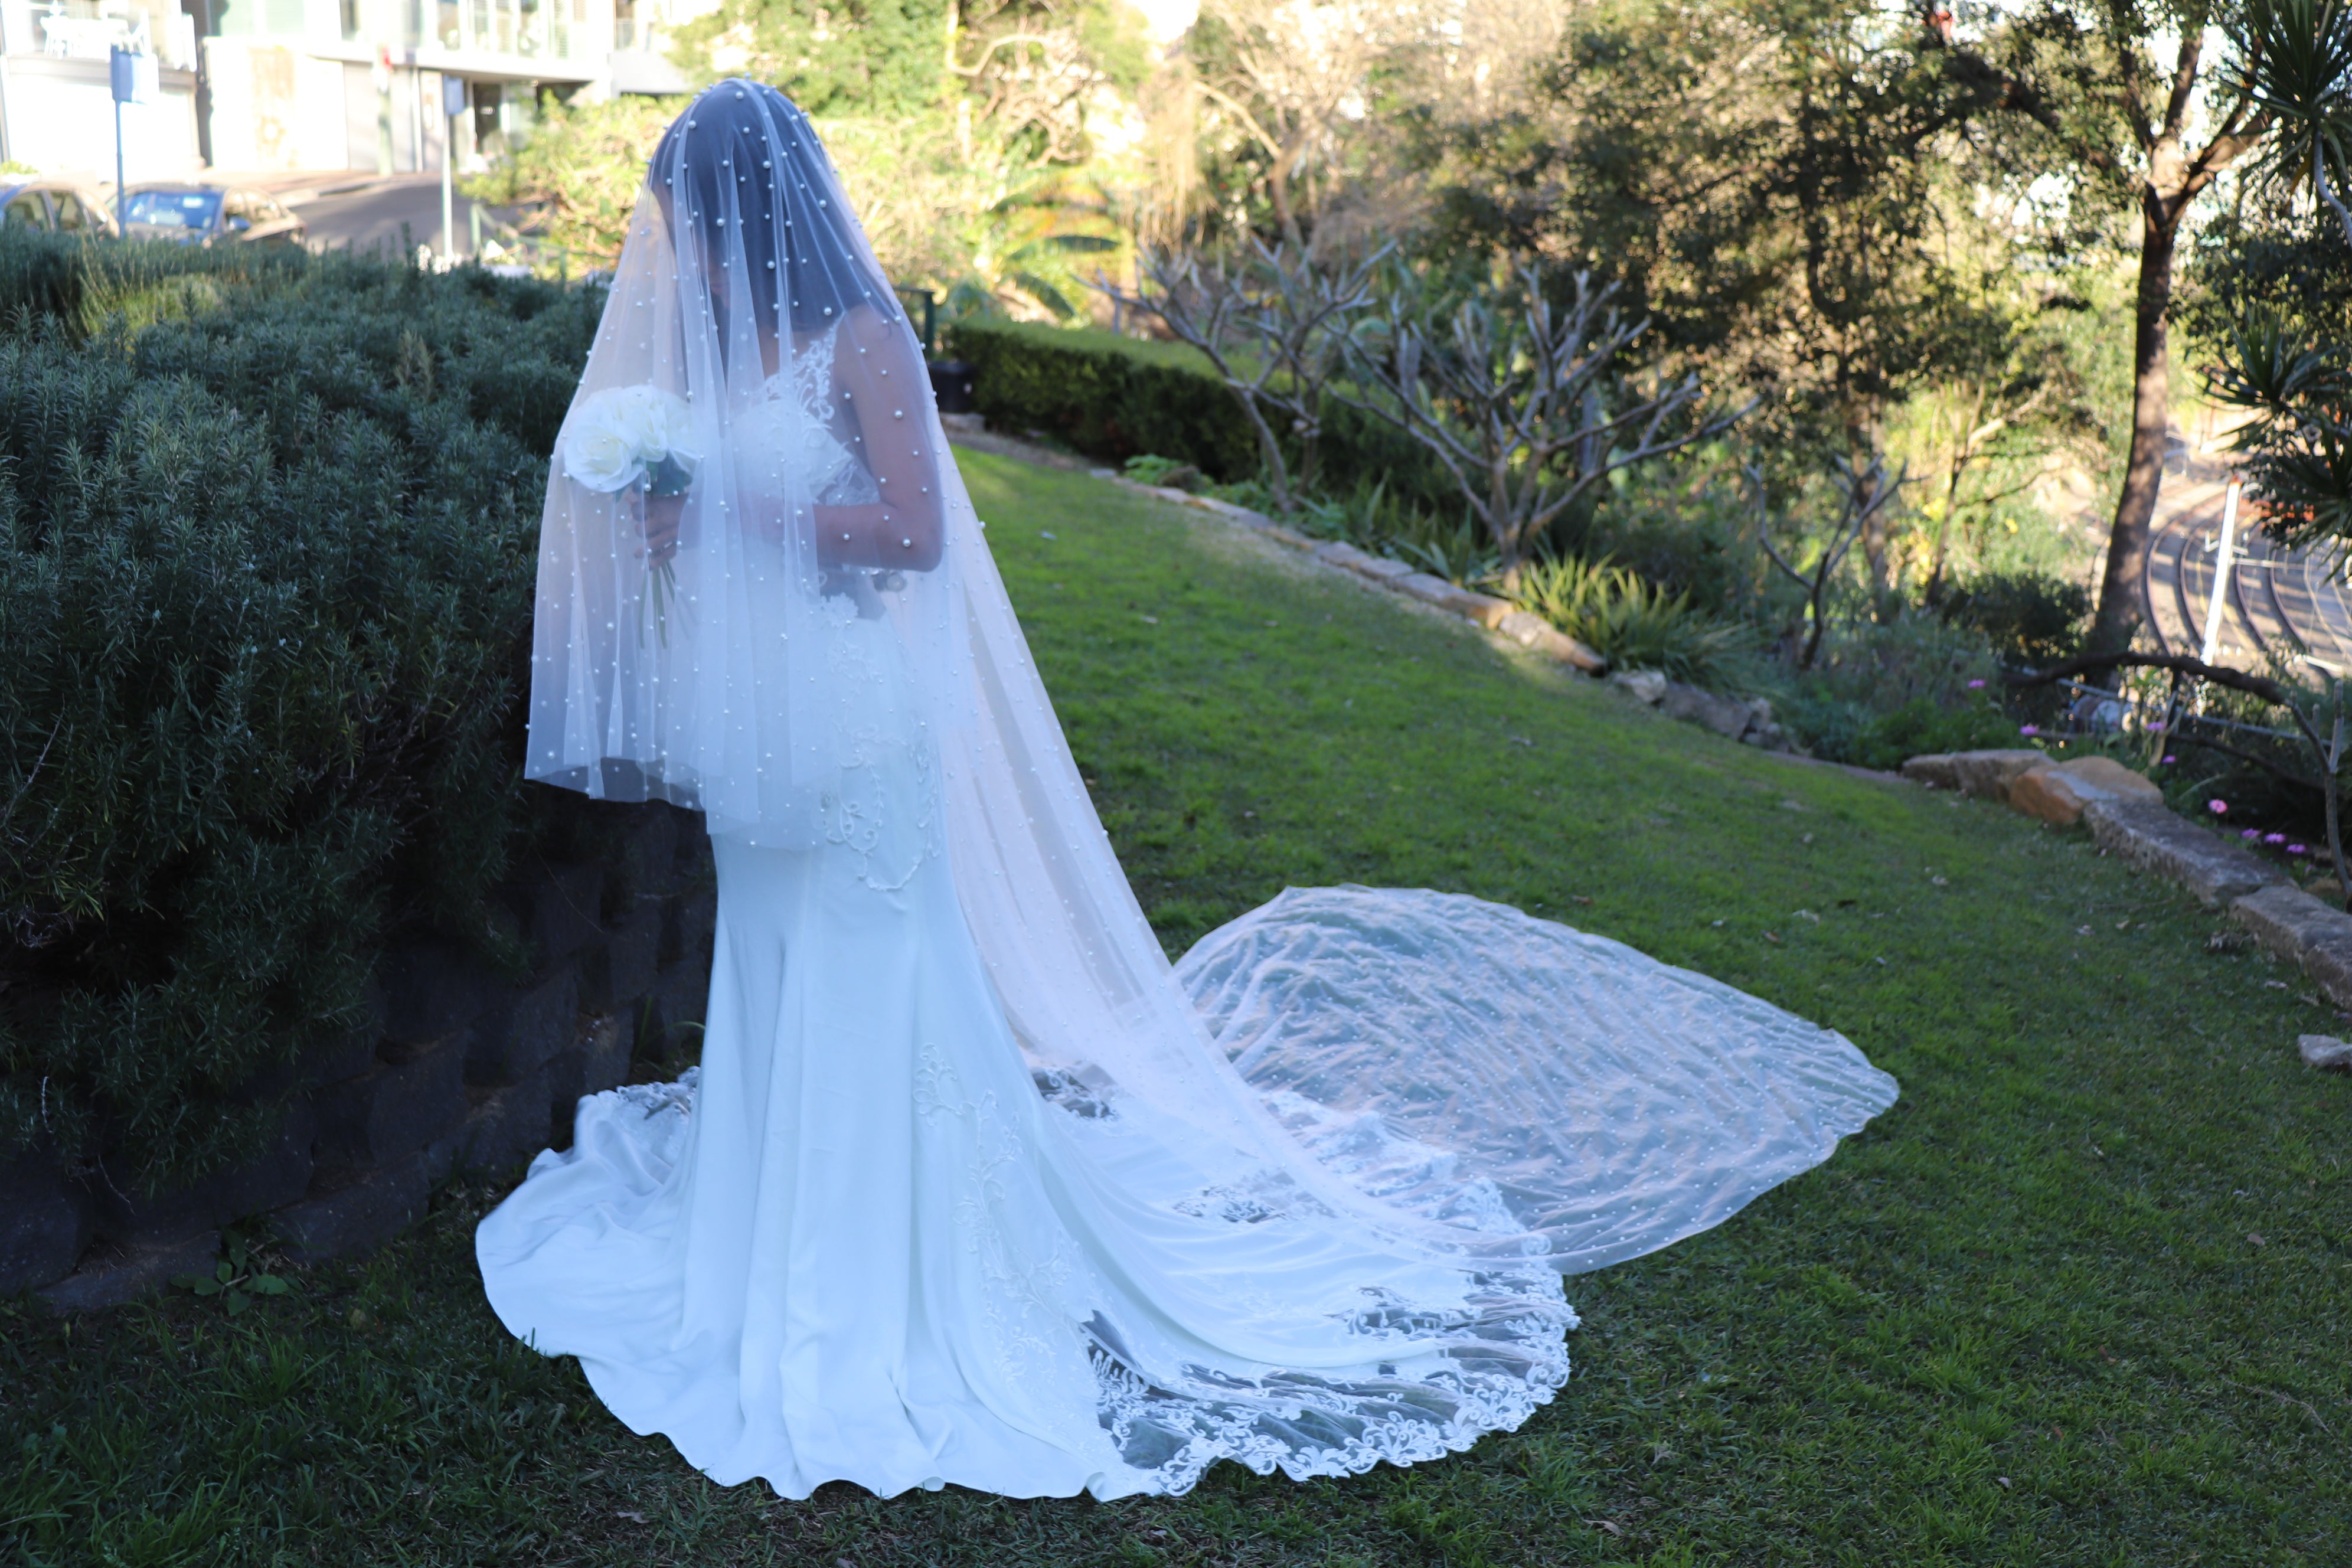 PEARL CATHEDRAL VEIL